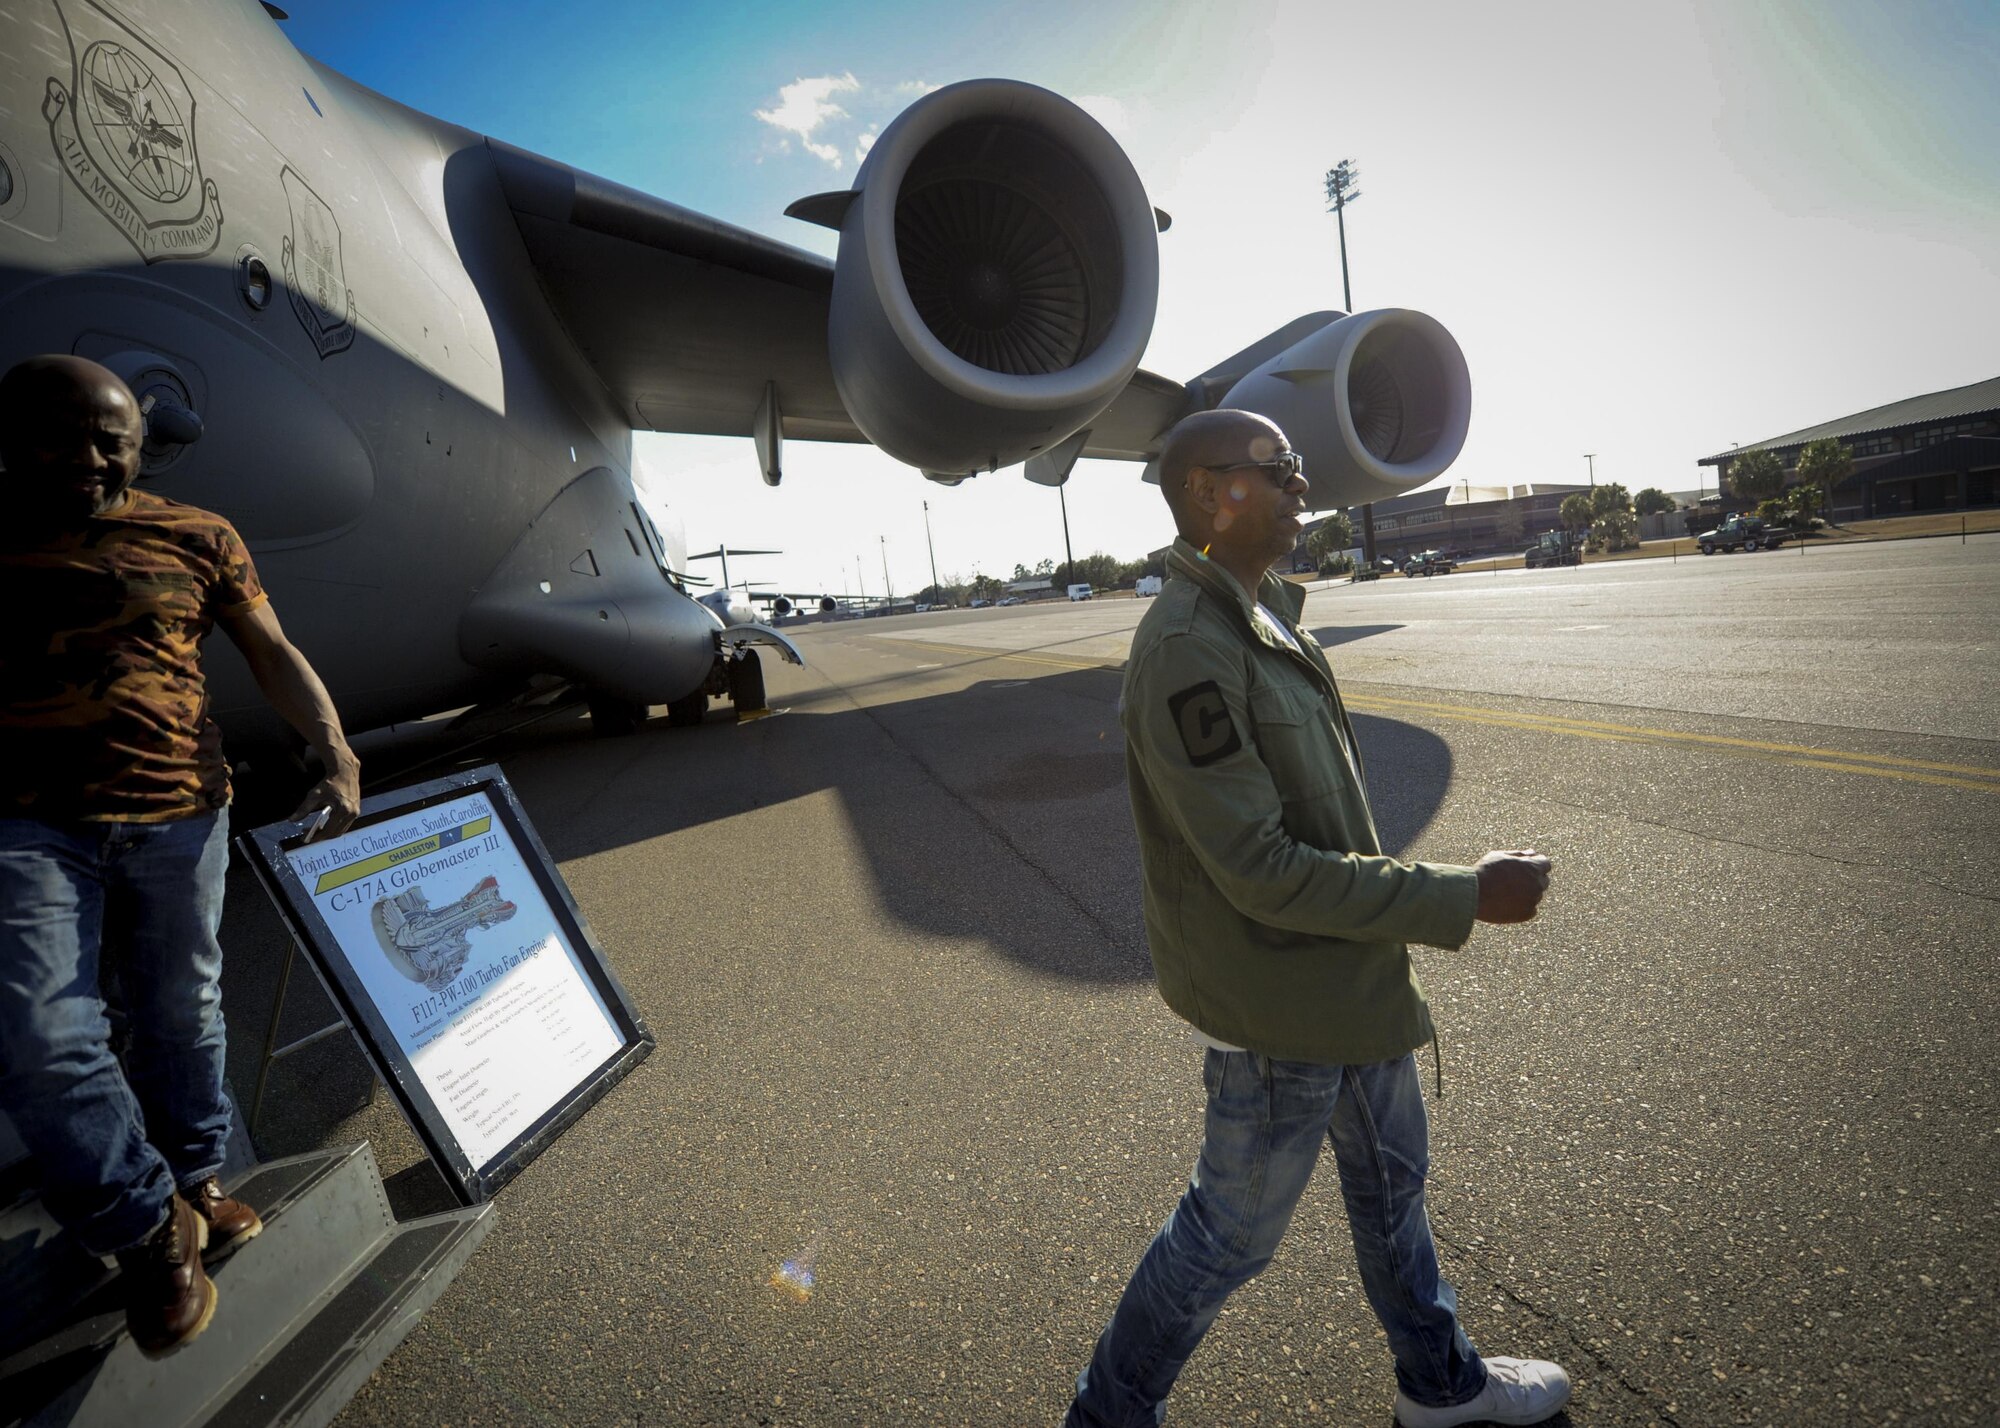 (From right) Actor/comedian Dave Chappelle, and actor/comedian Donnell Rawlings exit a C-17 Globemaster III static display during a visit to the troops at Joint Base Charleston Feb. 2 . Chappelle & Rawlings were in town as part of their comedy tour.  After touring a C-17, the two were welcomed by an eager crowd of over 200 military members and federal civilians at the Charleston Club.  (U.S. Air Force photo by Senior Airman Tom Brading)